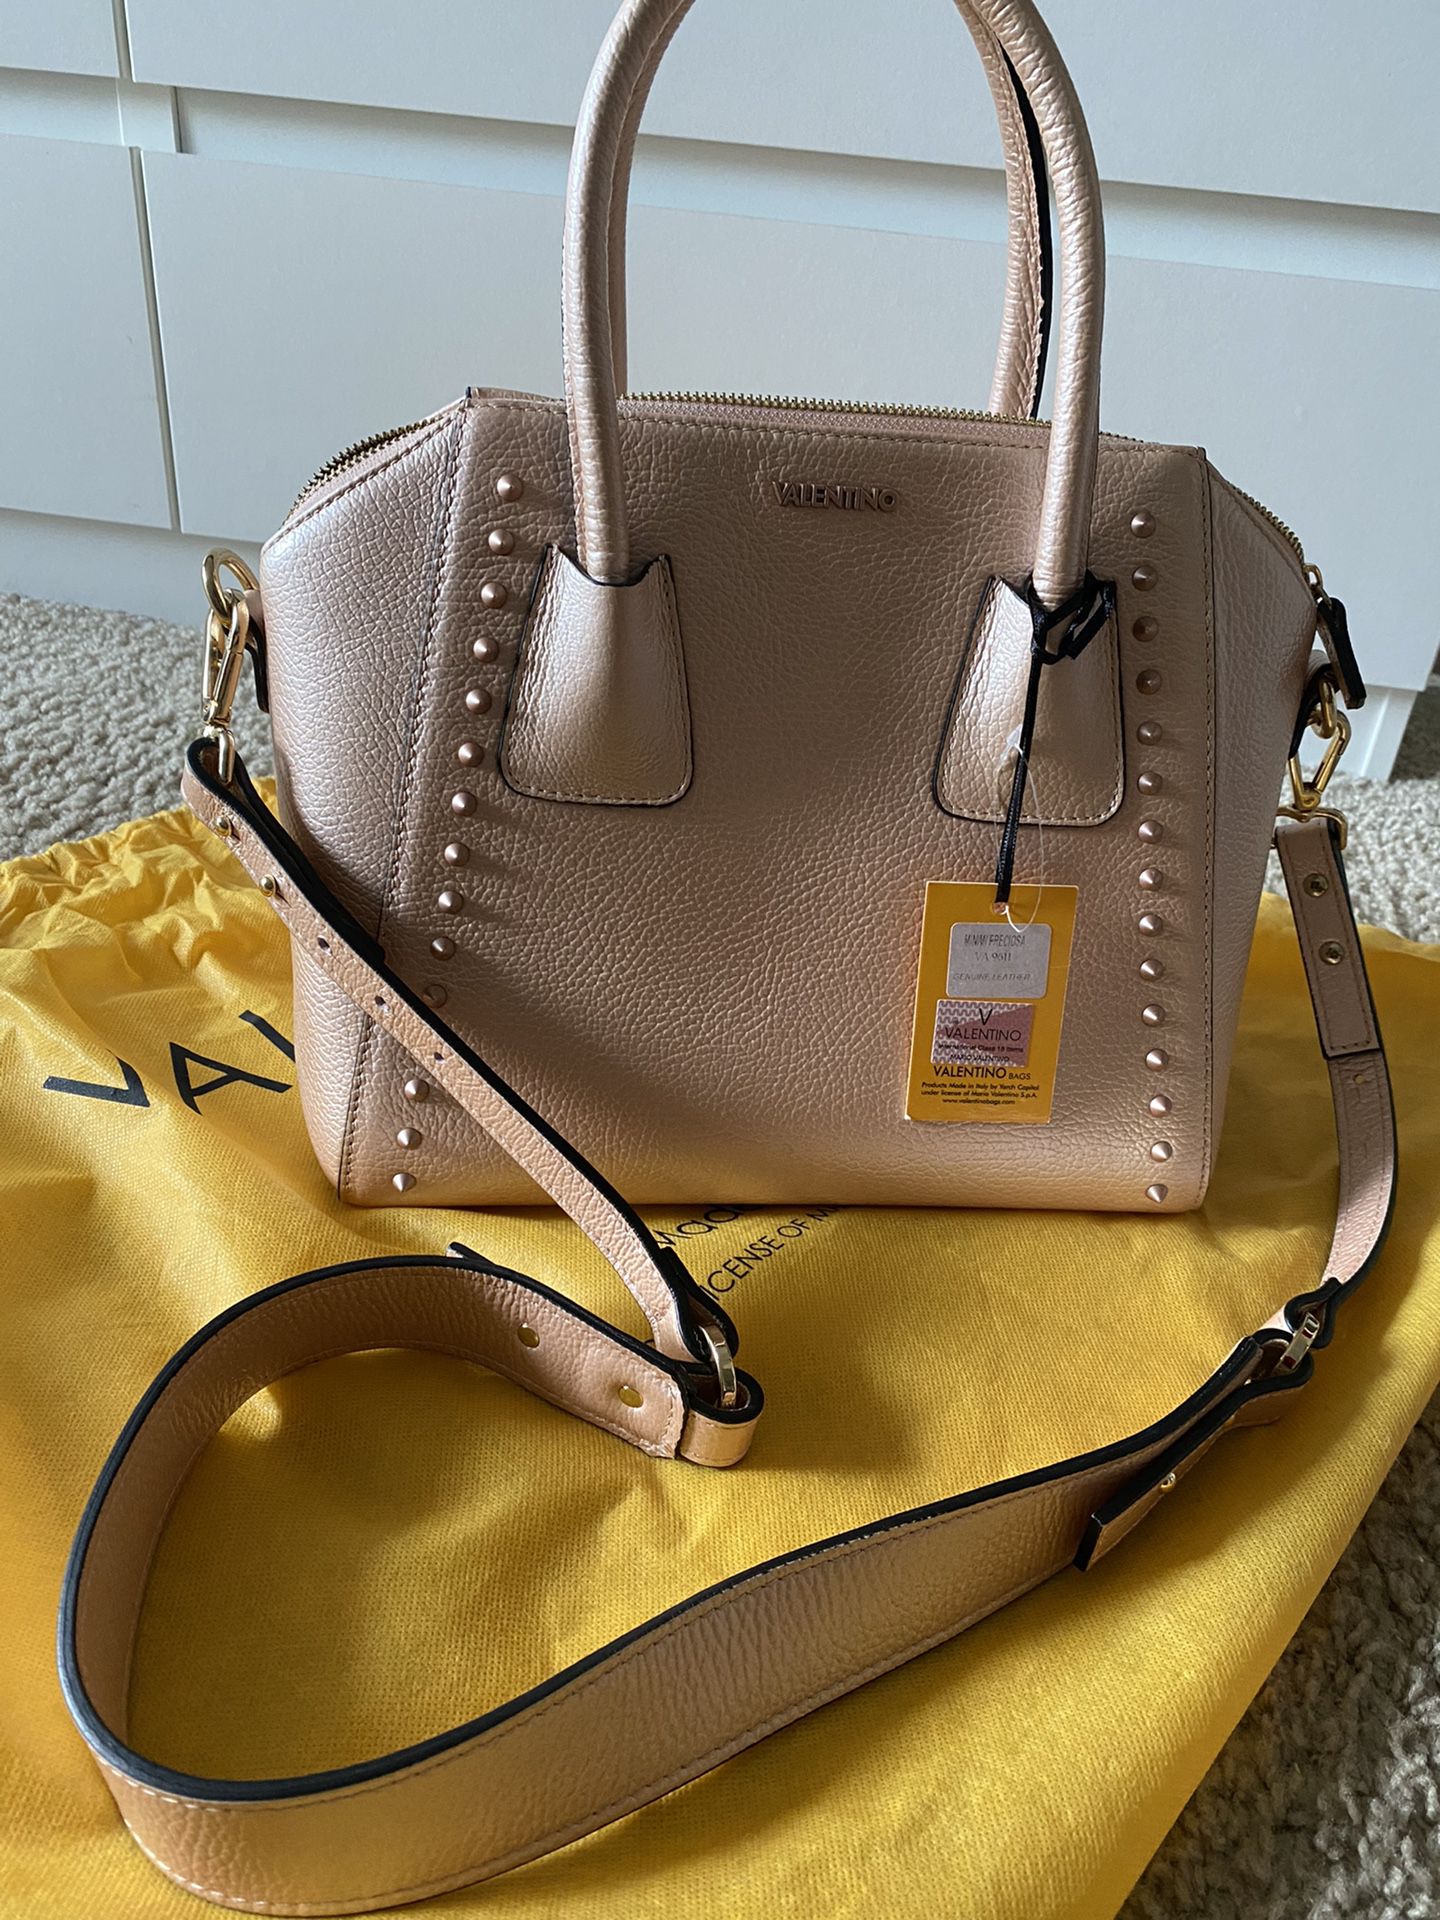 Valentino Bag for Sale in San Diego, CA OfferUp